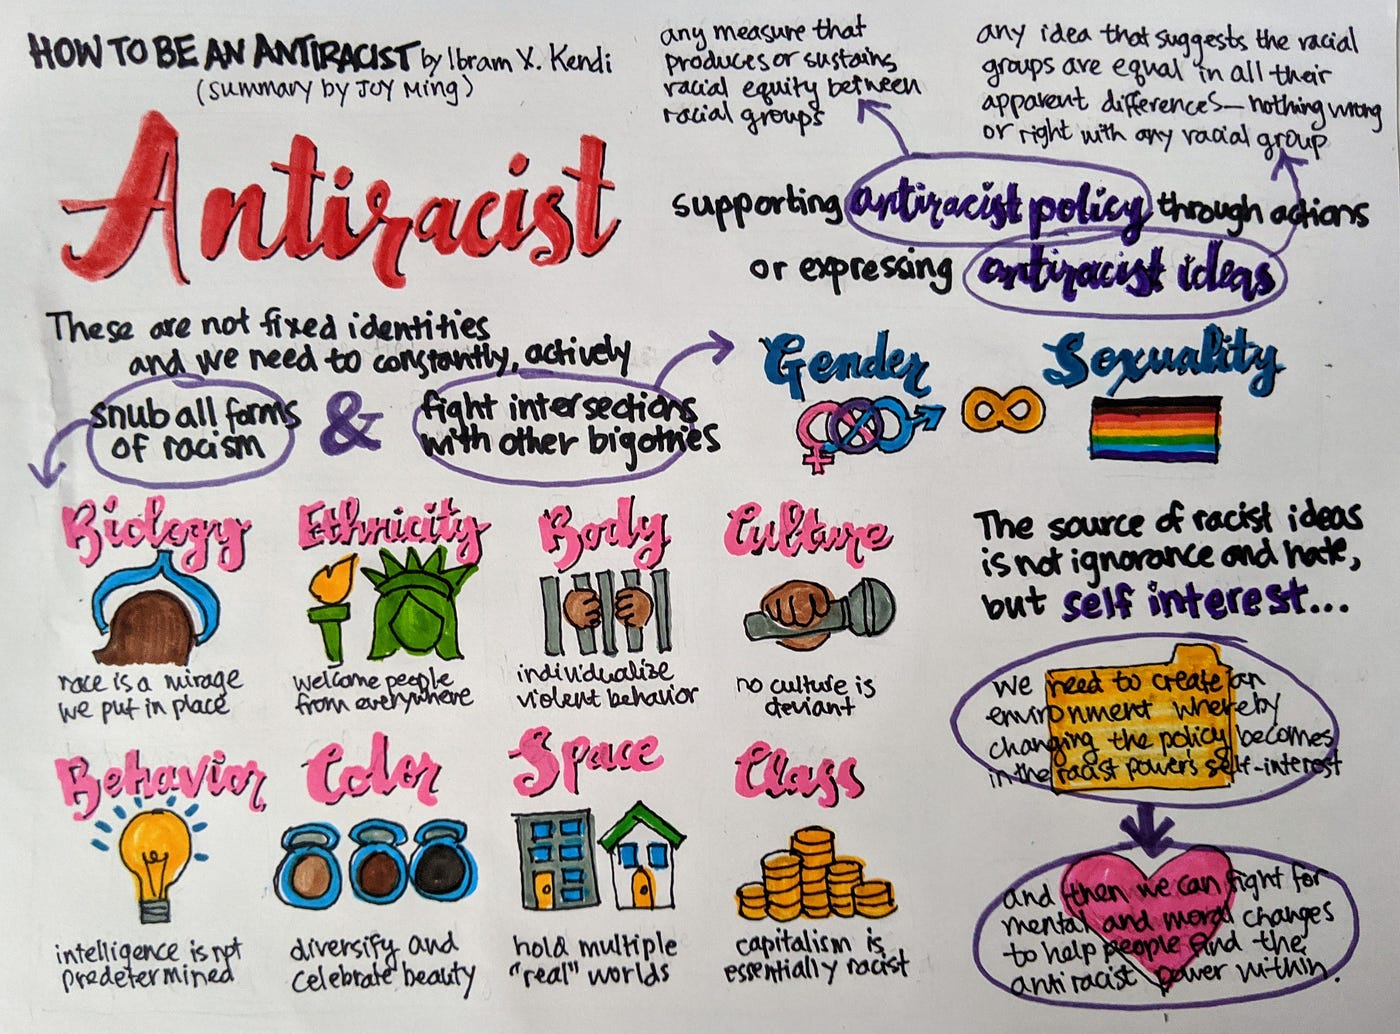 Visual summary of some of the concepts from How To Be an Antiracist. Please refer to the linked blogpost for a full transcription of the text in the image.